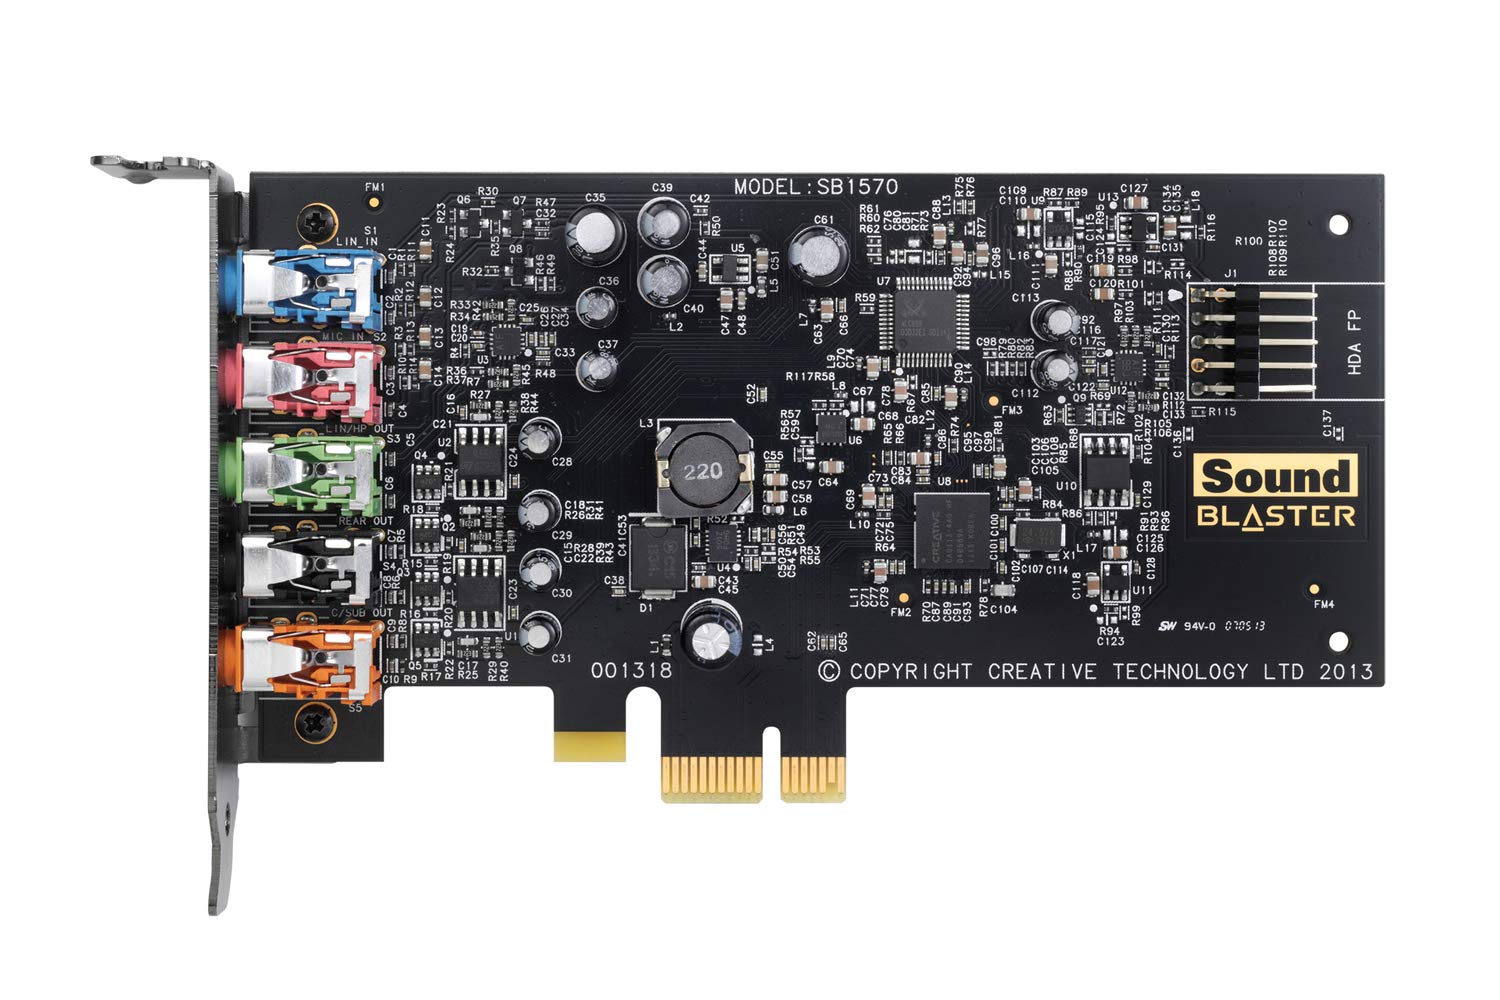 Creative Sound Blaster Audigy FX PCIe 5.1 Internal Sound Card with High Performance Headphone Amp for PCs